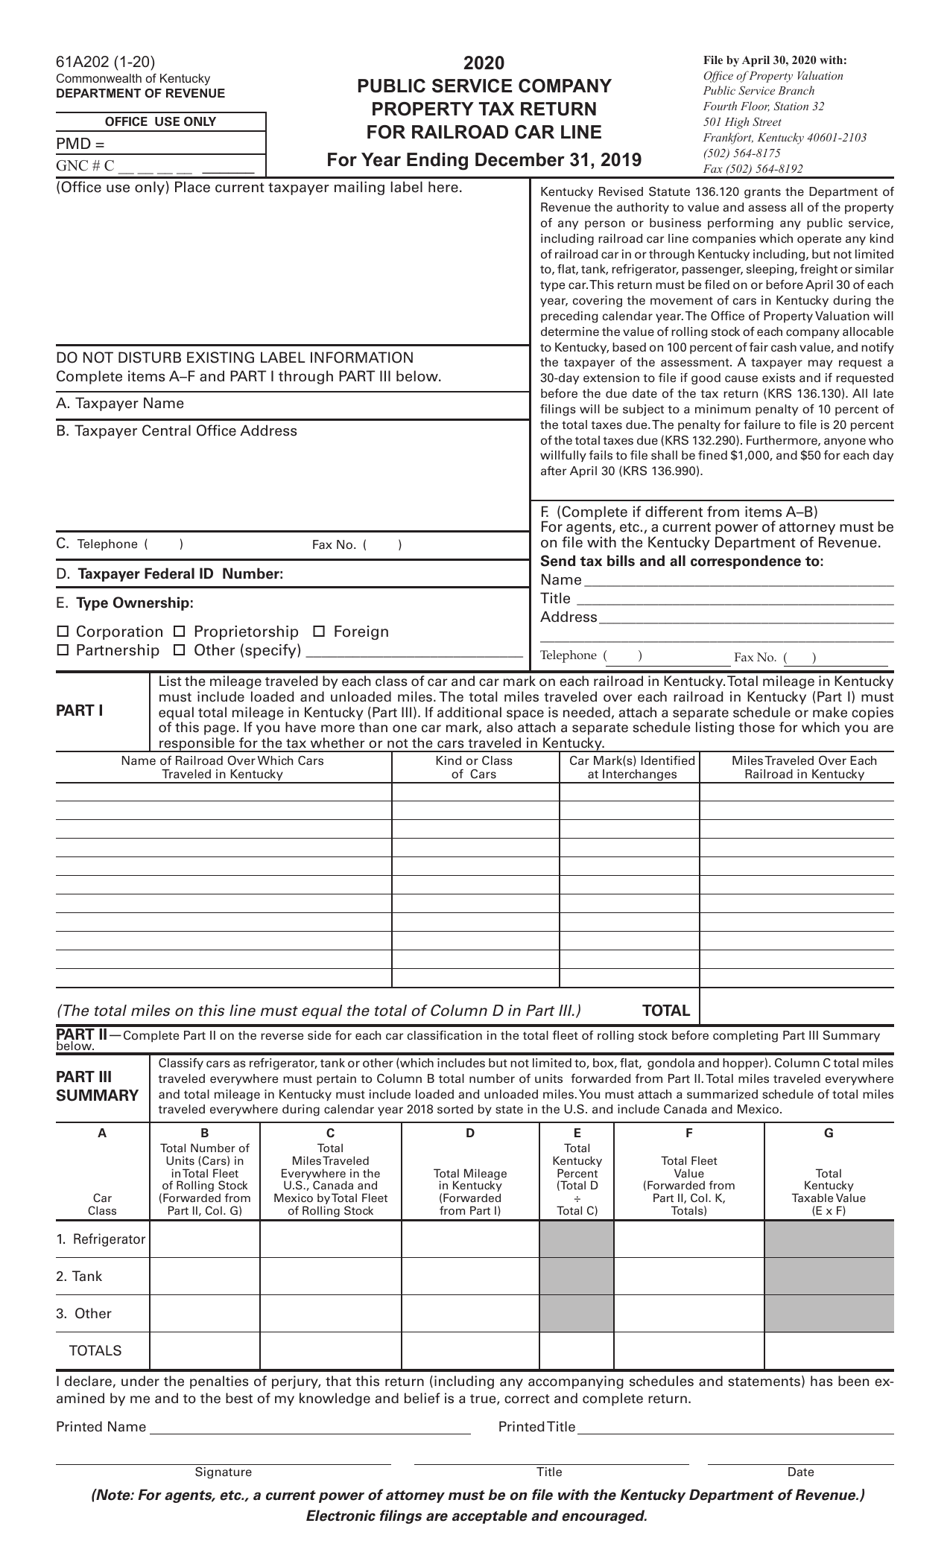 Form 61A202 Public Service Company Property Tax Return for Railroad Car Lines - Kentucky, Page 1